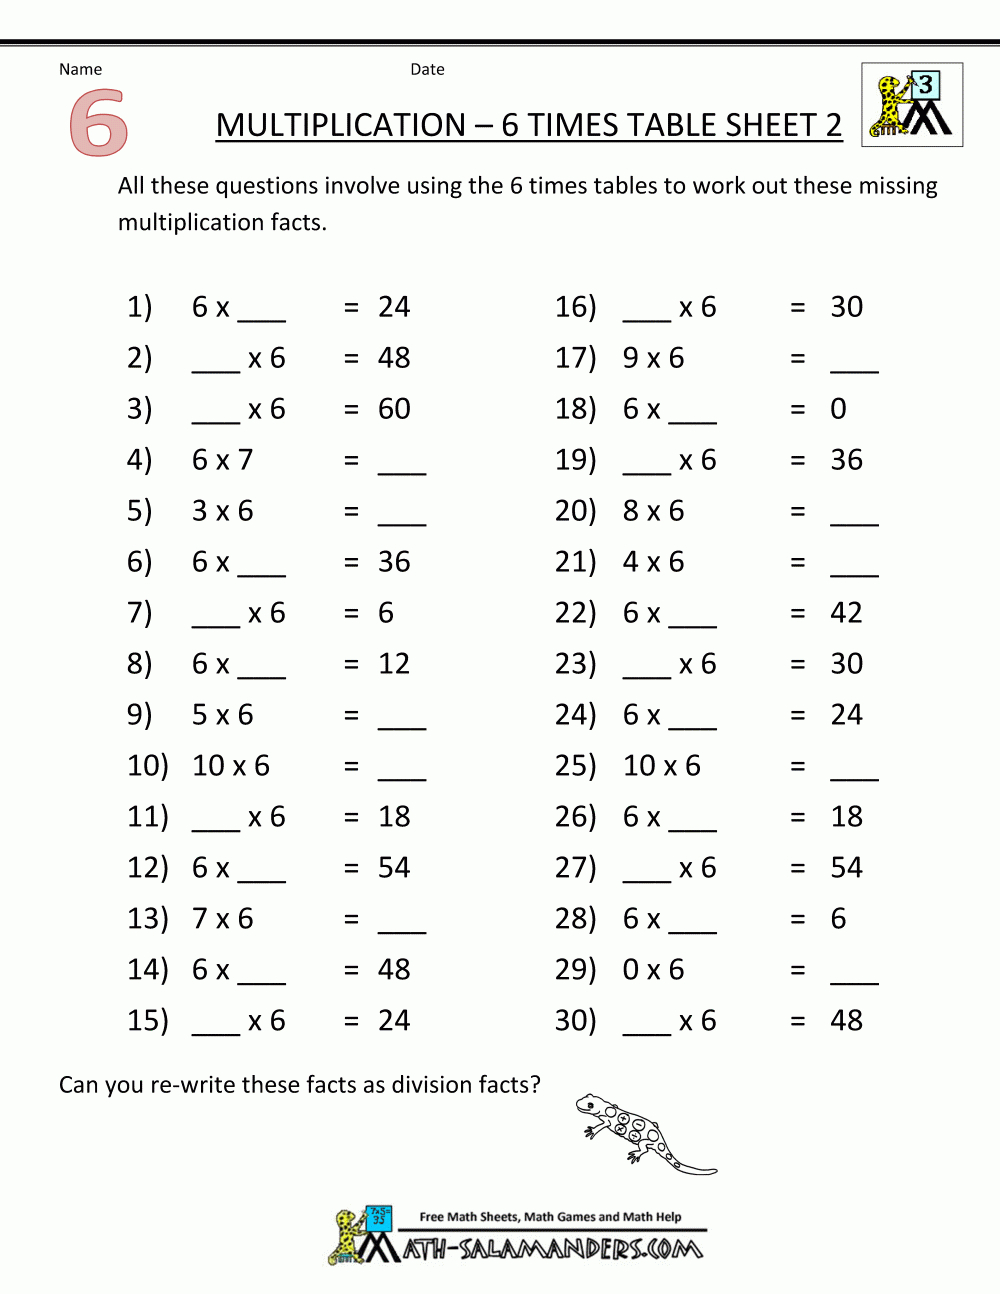 Multiplication Drill Sheets 3Rd Grade | 7Th Grade Math Worksheets Free Printable With Answers